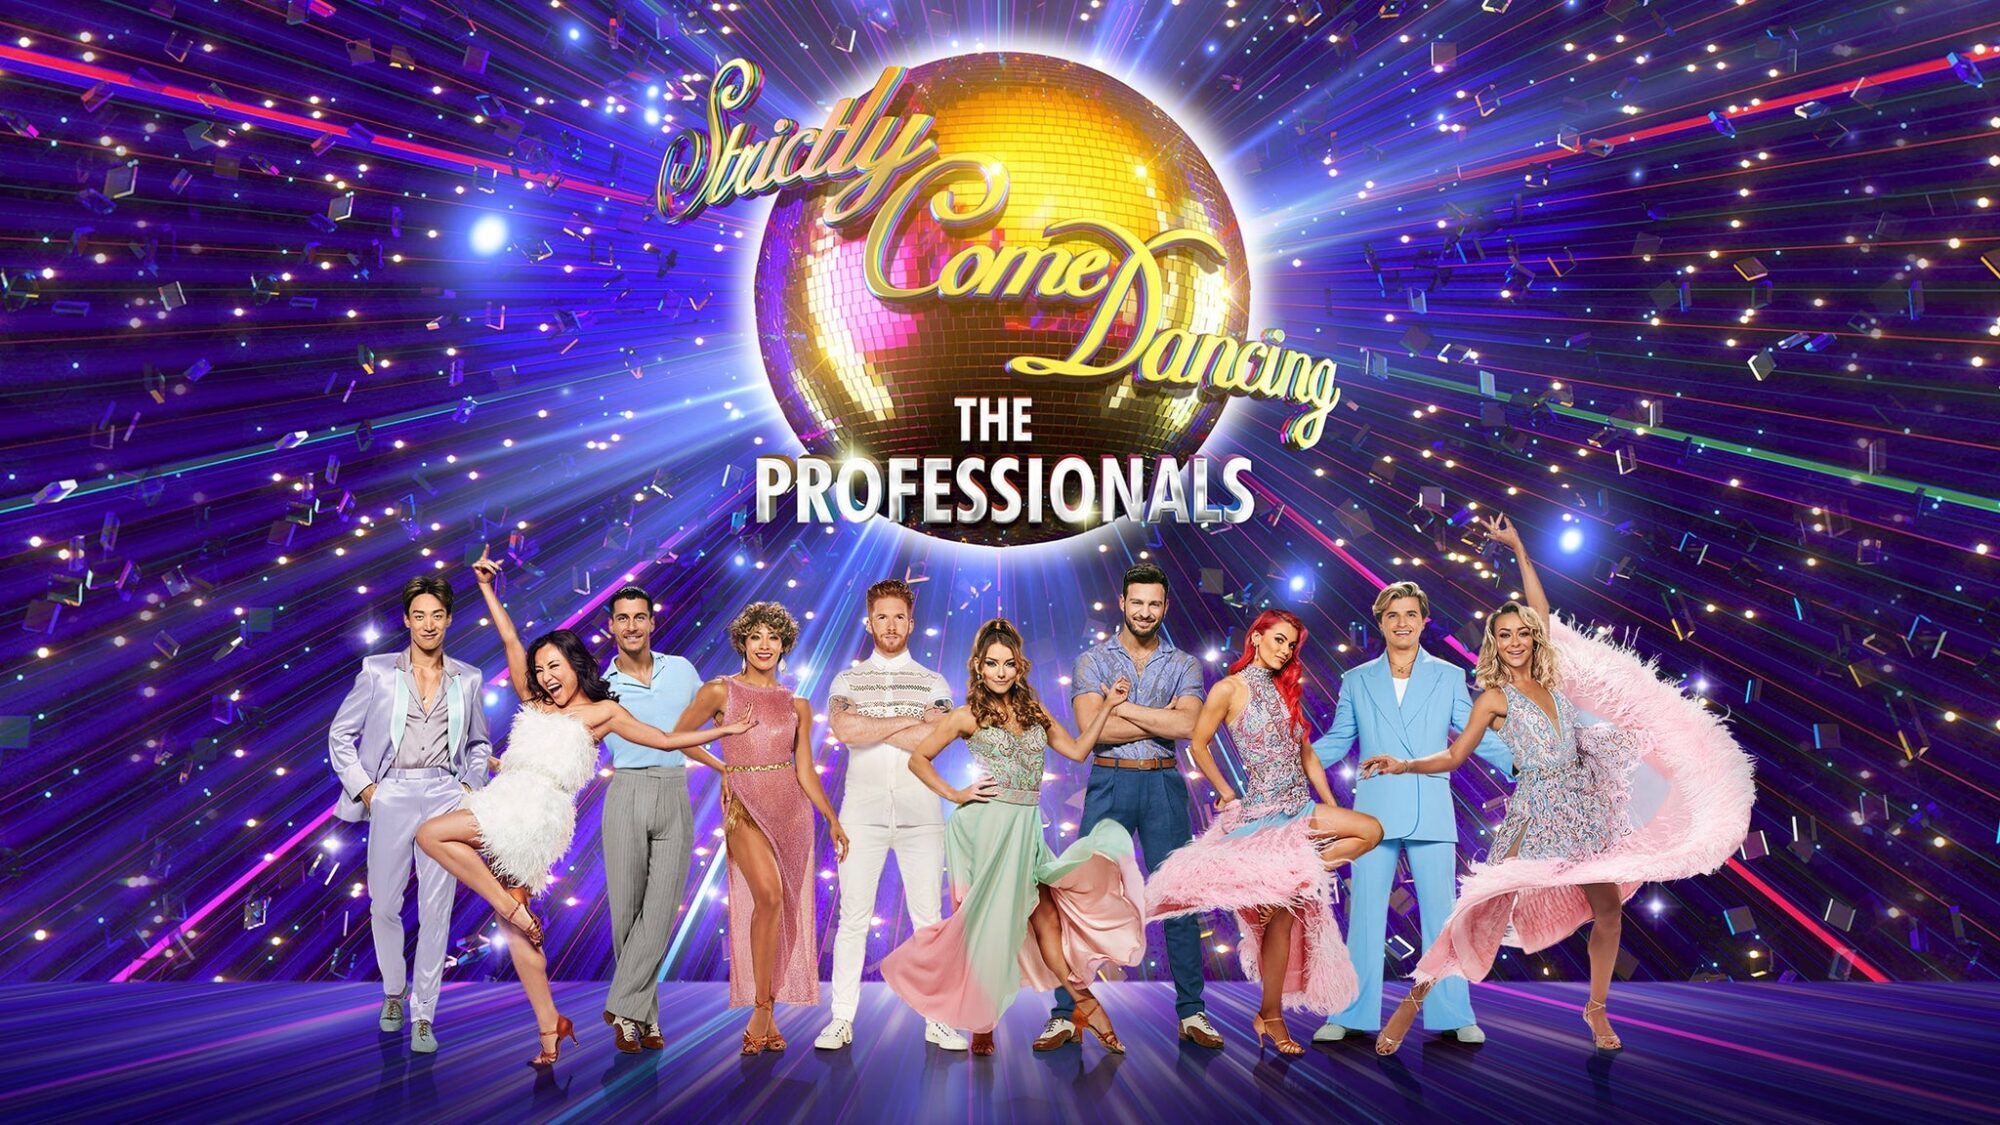 Image name Strictly Come Dancing the Professionals 2023 at Sheffield City Hall Oval Hall Sheffield the 7 image from the post Strictly Come Dancing the Professionals 2023 at York Barbican, York in Yorkshire.com.